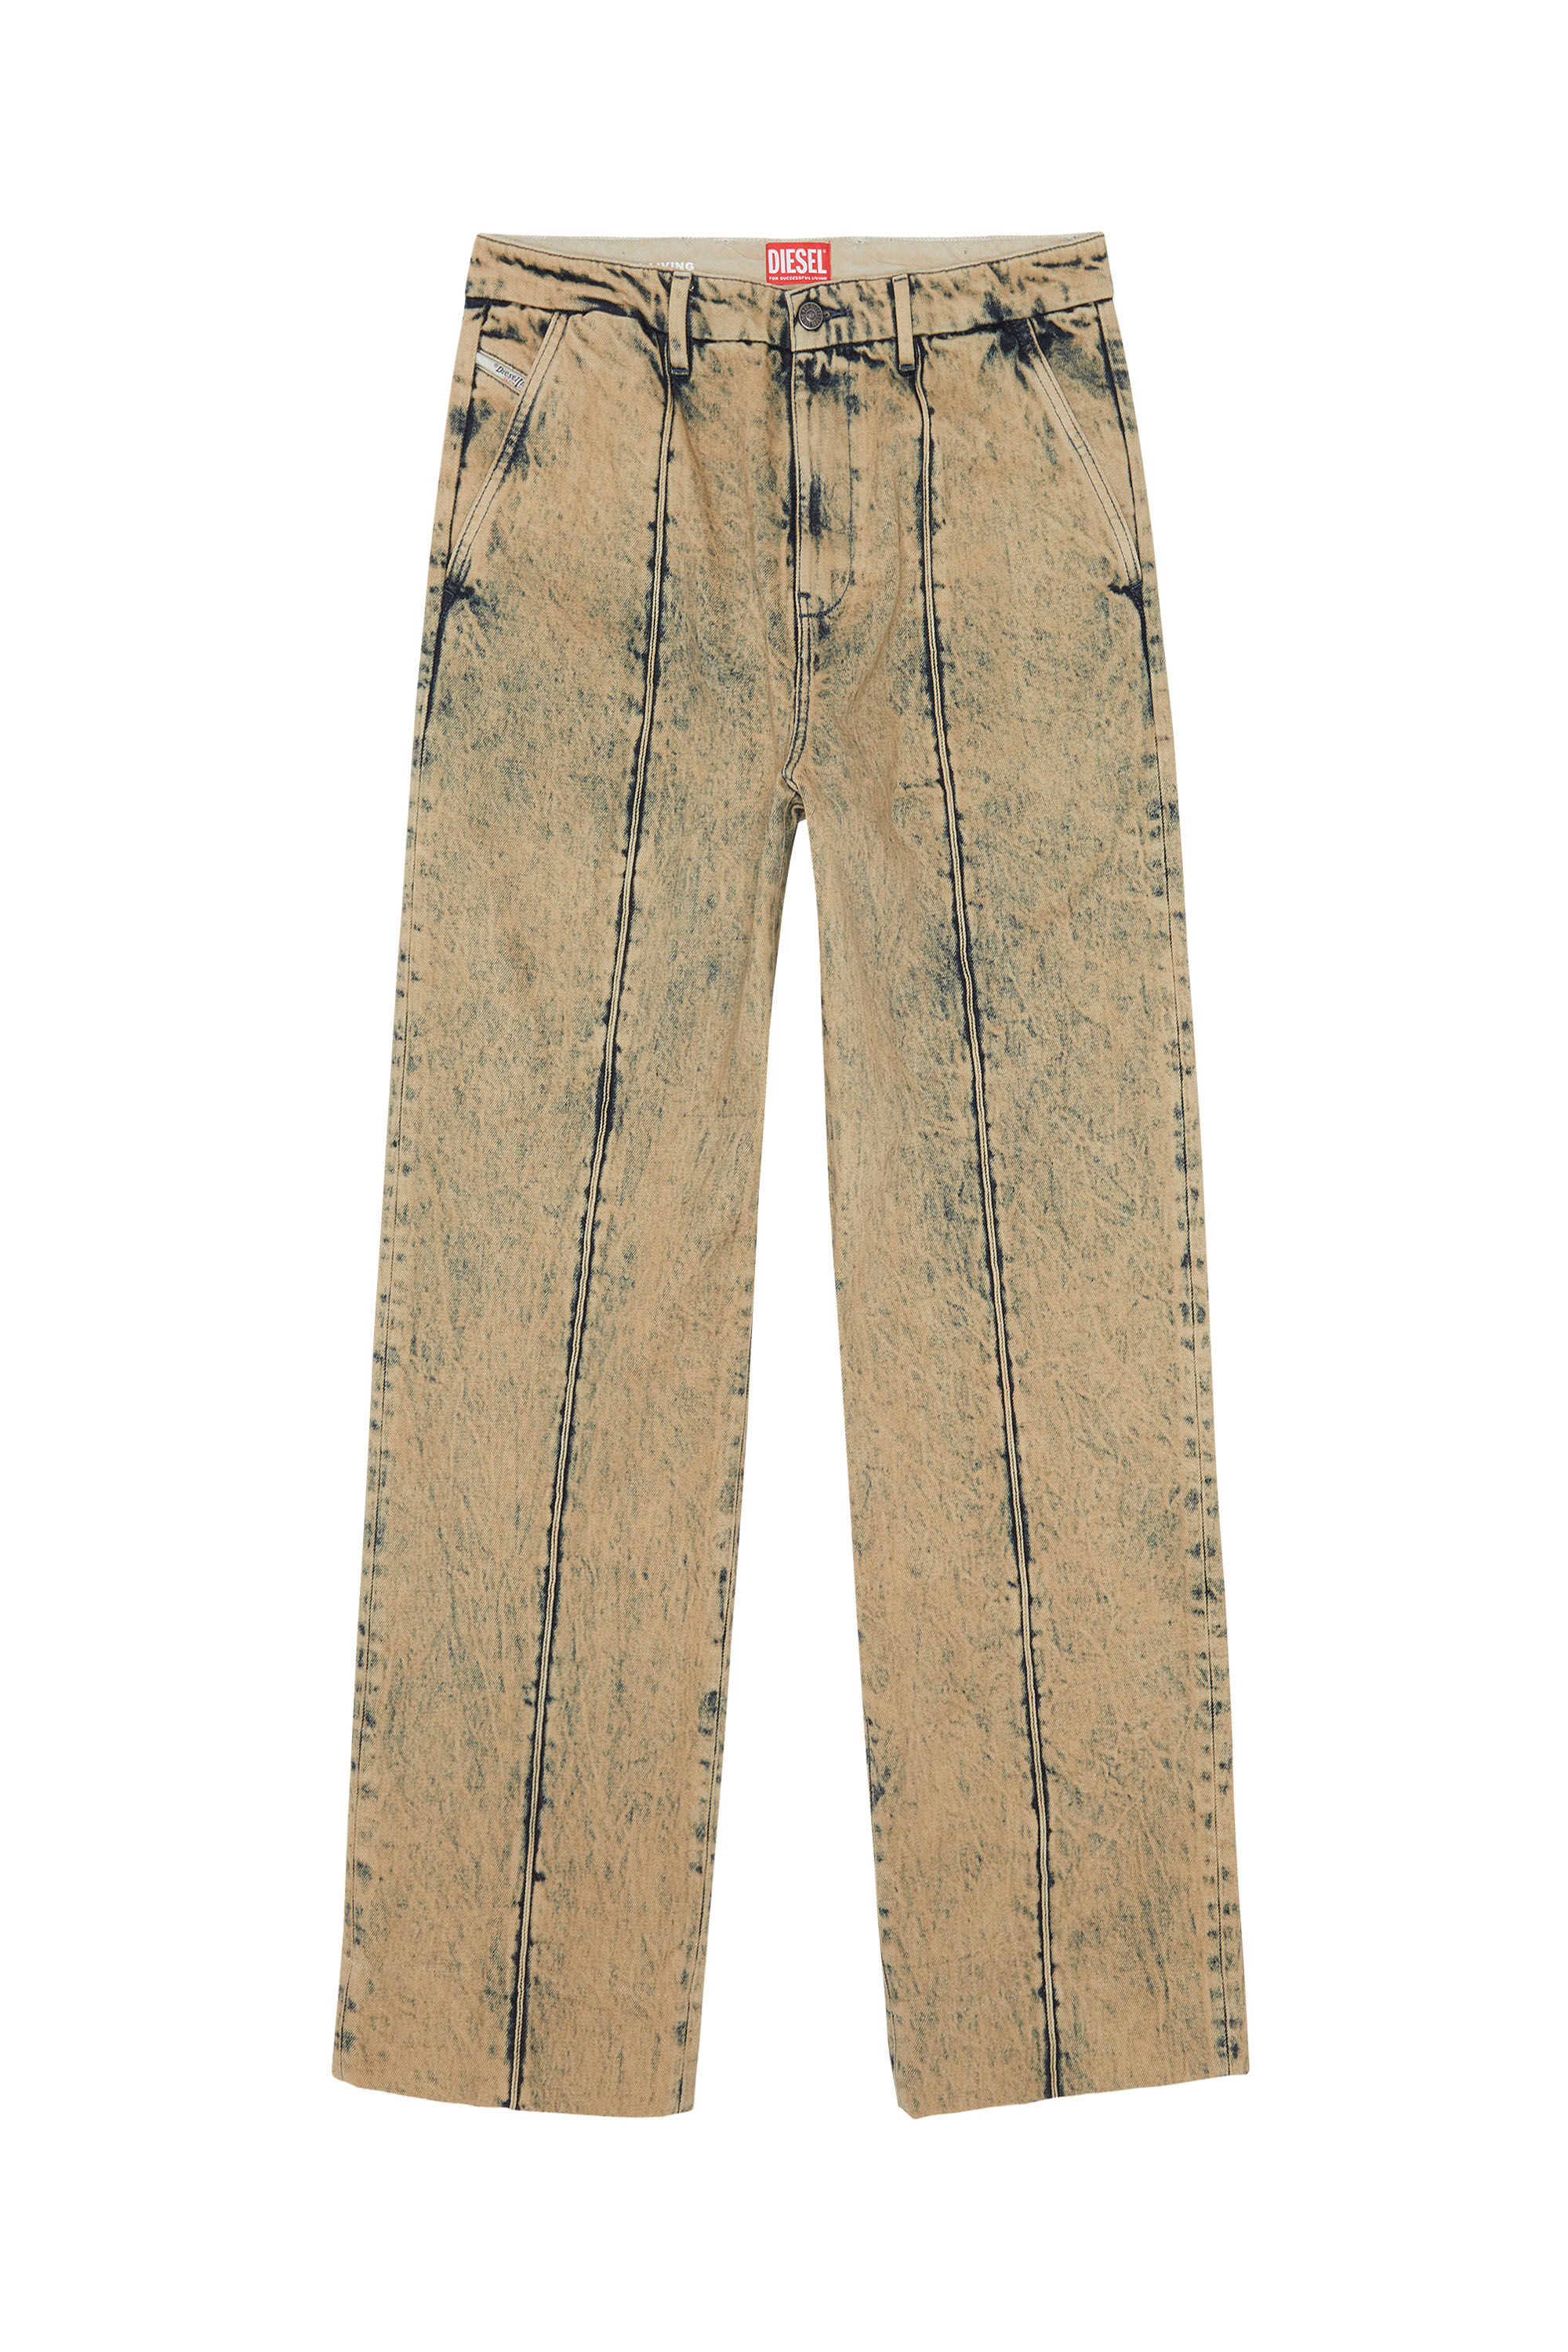 Diesel - D-Chino-Work 0EIAN Straight Jeans,  - Image 2